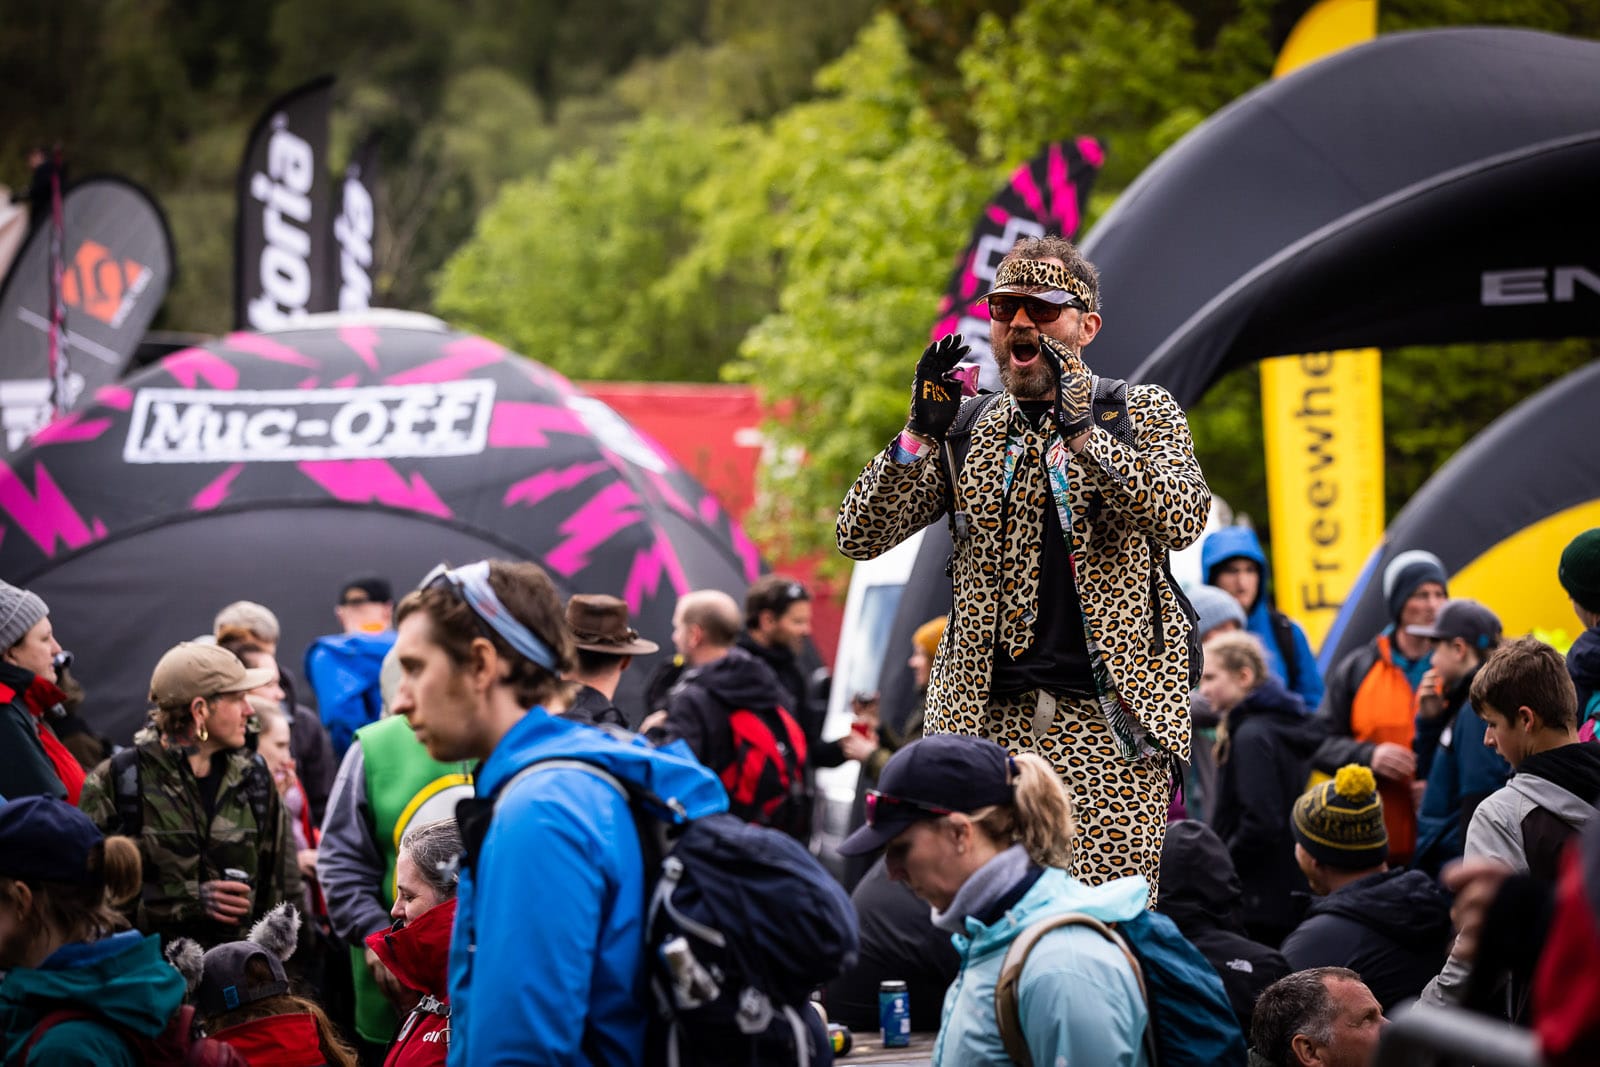 Whoever you want to win, whatever you want the weather to do, Fort William has a unique vibe that only gets better as the weekend goes on. The horns get louder, the mini cowbells go bonkers and the fans, oh the fans, make this place sing. – Seb